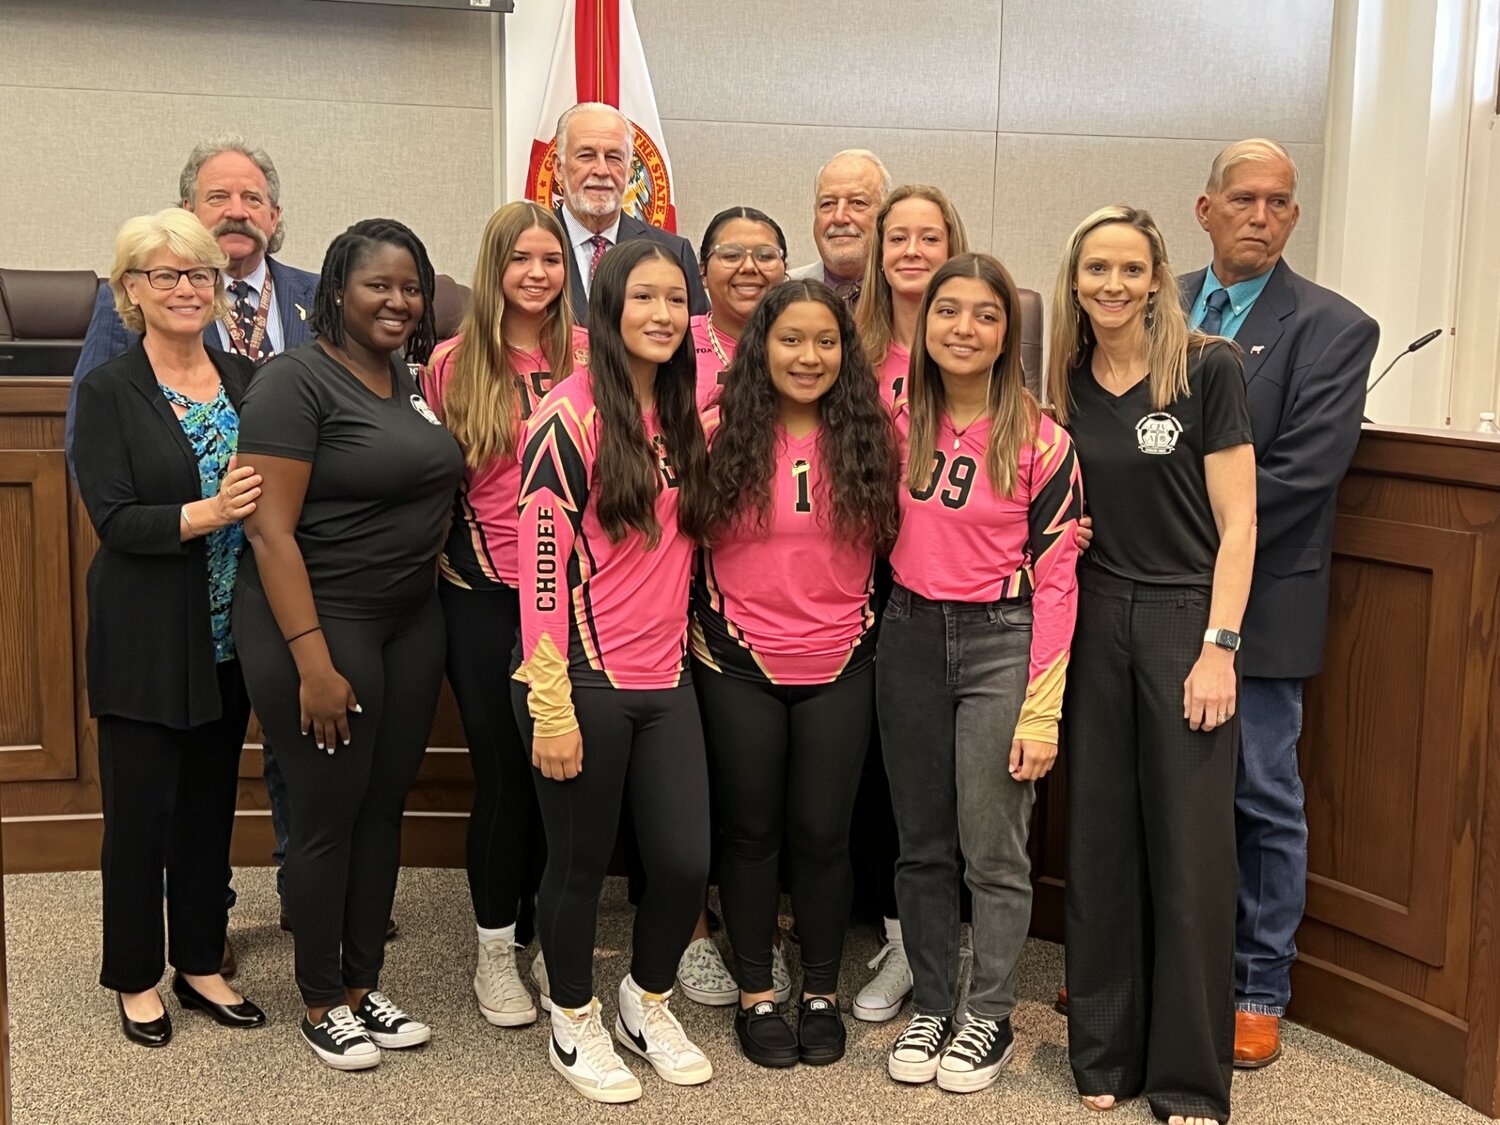 OKEECHOBEE – At their June 8 meeting, Okeechobee County Commissioners honored the 2023 Chobee Volleyball Academy 15 and Under Team advancement to the 50th AAU Girls Junior National Volleyball Championship. [Photo by Katrina Elsken/Lake Okeechobee News]